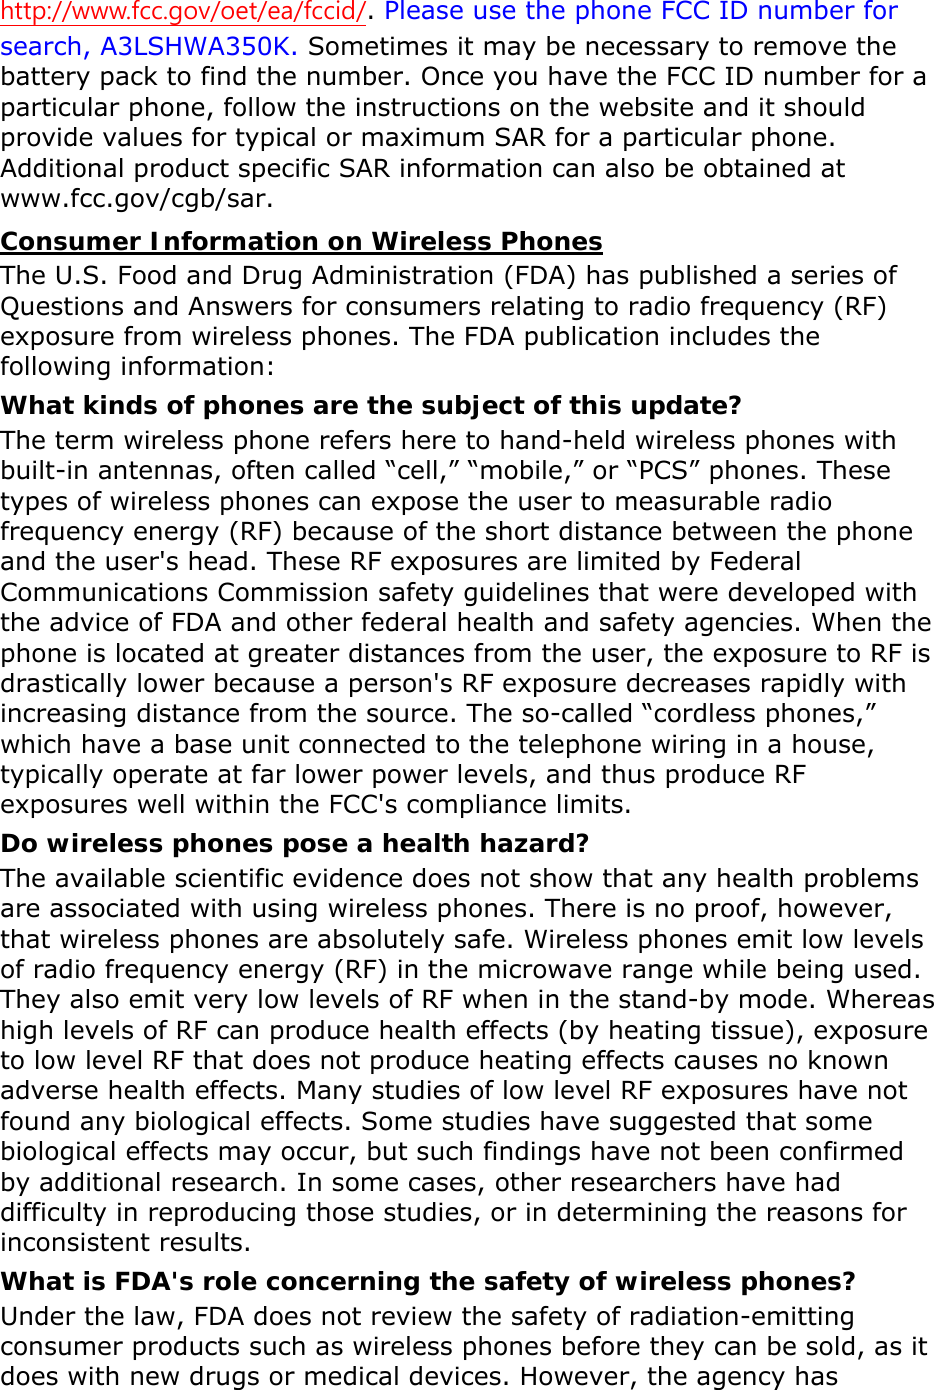 http://www.fcc.gov/oet/ea/fccid/. Please use the phone FCC ID number for search, A3LSHWA350K. Sometimes it may be necessary to remove the battery pack to find the number. Once you have the FCC ID number for a particular phone, follow the instructions on the website and it should provide values for typical or maximum SAR for a particular phone. Additional product specific SAR information can also be obtained at www.fcc.gov/cgb/sar. Consumer Information on Wireless Phones The U.S. Food and Drug Administration (FDA) has published a series of Questions and Answers for consumers relating to radio frequency (RF) exposure from wireless phones. The FDA publication includes the following information: What kinds of phones are the subject of this update? The term wireless phone refers here to hand-held wireless phones with built-in antennas, often called “cell,” “mobile,” or “PCS” phones. These types of wireless phones can expose the user to measurable radio frequency energy (RF) because of the short distance between the phone and the user&apos;s head. These RF exposures are limited by Federal Communications Commission safety guidelines that were developed with the advice of FDA and other federal health and safety agencies. When the phone is located at greater distances from the user, the exposure to RF is drastically lower because a person&apos;s RF exposure decreases rapidly with increasing distance from the source. The so-called “cordless phones,” which have a base unit connected to the telephone wiring in a house, typically operate at far lower power levels, and thus produce RF exposures well within the FCC&apos;s compliance limits. Do wireless phones pose a health hazard? The available scientific evidence does not show that any health problems are associated with using wireless phones. There is no proof, however, that wireless phones are absolutely safe. Wireless phones emit low levels of radio frequency energy (RF) in the microwave range while being used. They also emit very low levels of RF when in the stand-by mode. Whereas high levels of RF can produce health effects (by heating tissue), exposure to low level RF that does not produce heating effects causes no known adverse health effects. Many studies of low level RF exposures have not found any biological effects. Some studies have suggested that some biological effects may occur, but such findings have not been confirmed by additional research. In some cases, other researchers have had difficulty in reproducing those studies, or in determining the reasons for inconsistent results. What is FDA&apos;s role concerning the safety of wireless phones? Under the law, FDA does not review the safety of radiation-emitting consumer products such as wireless phones before they can be sold, as it does with new drugs or medical devices. However, the agency has 